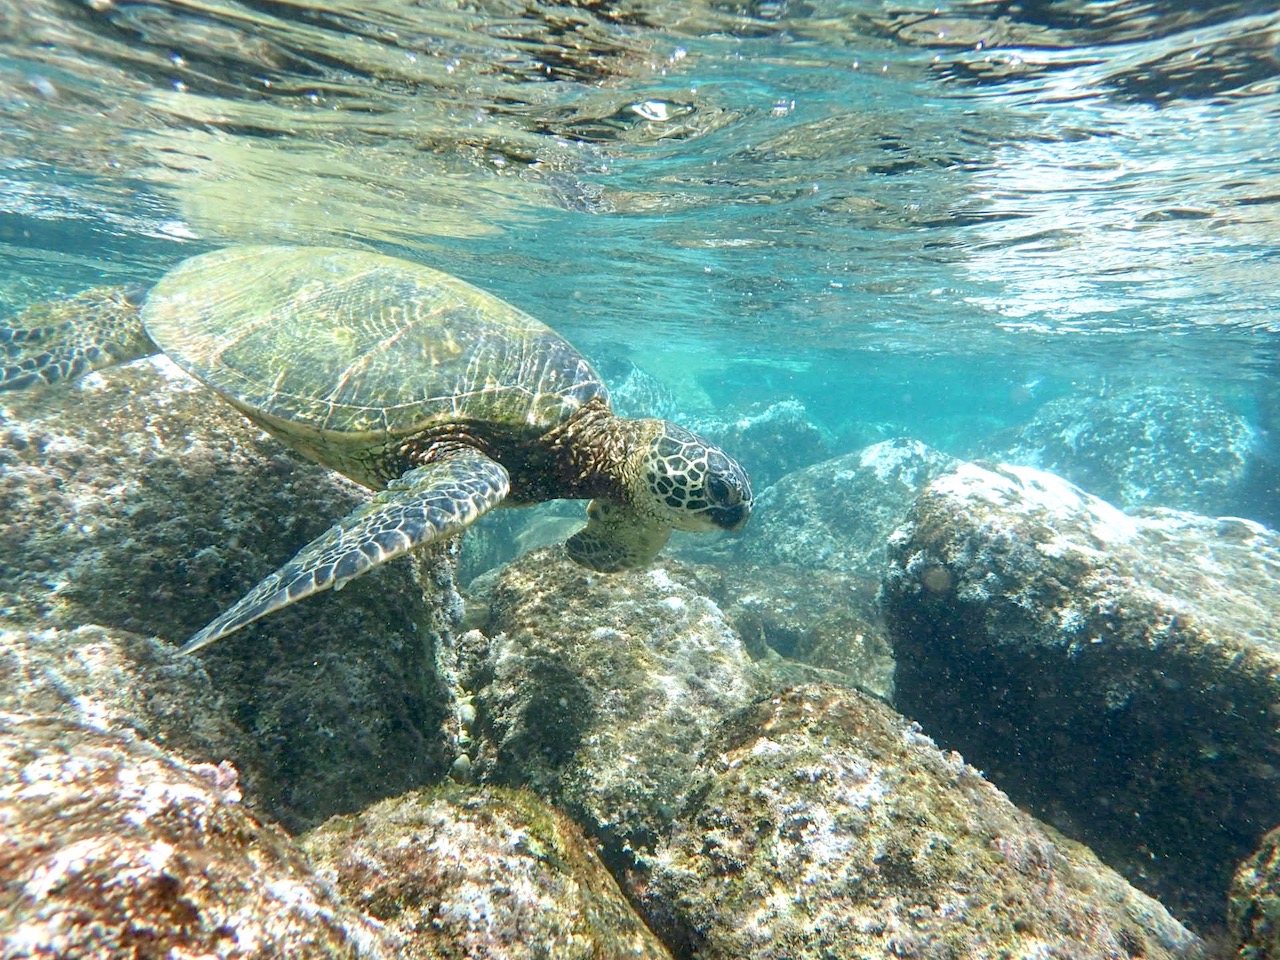 Snorkeling at Shark's Cove - Turtle